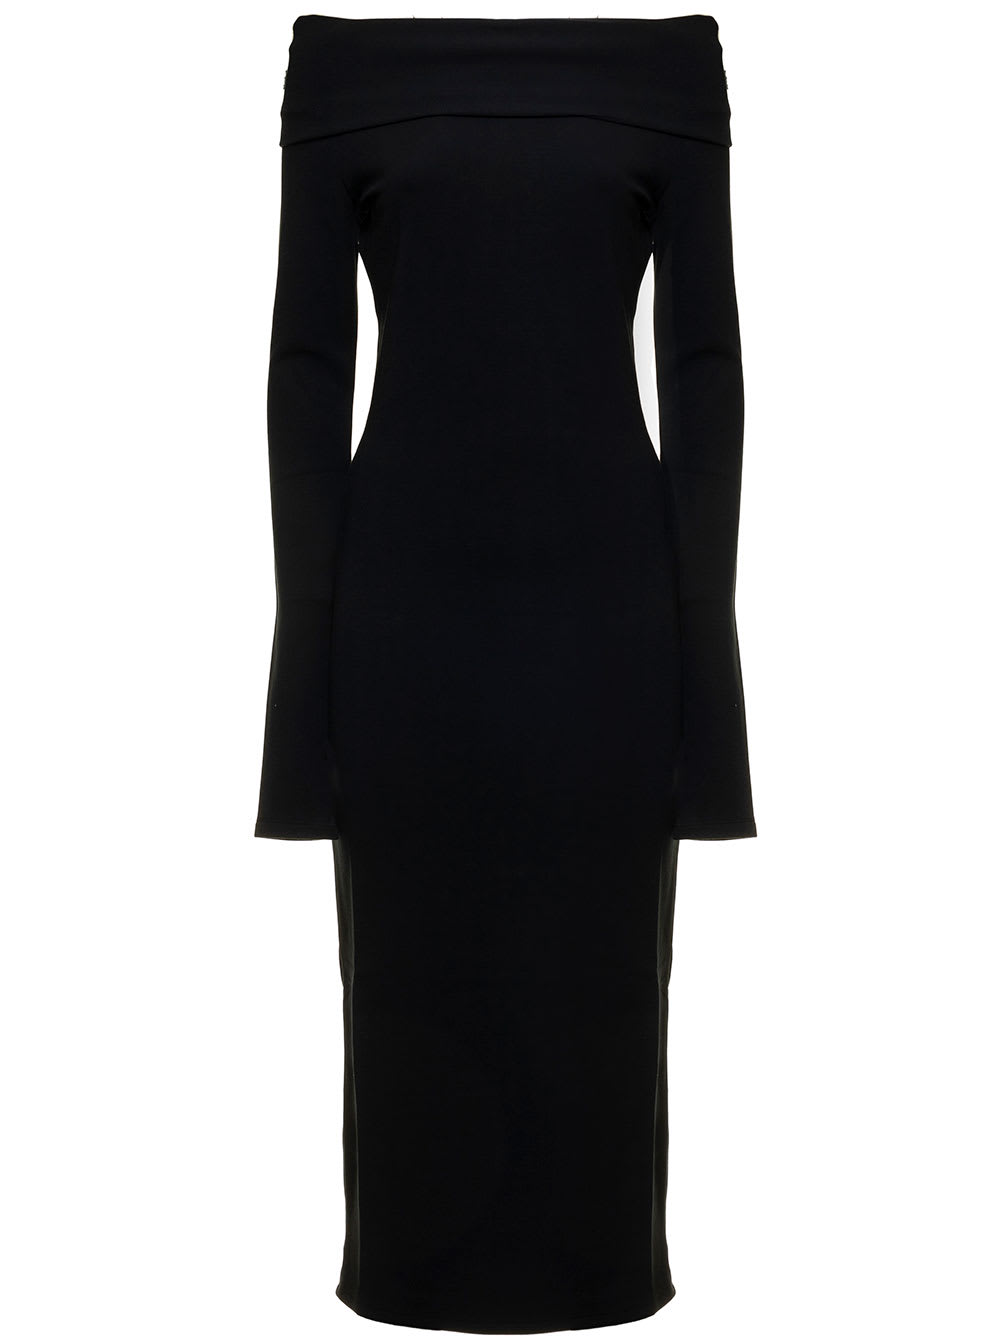 Black Midi Kaia Dress In Stretch Jersey Crepe With Off-the-shoulder Neckline The Andamane Woman